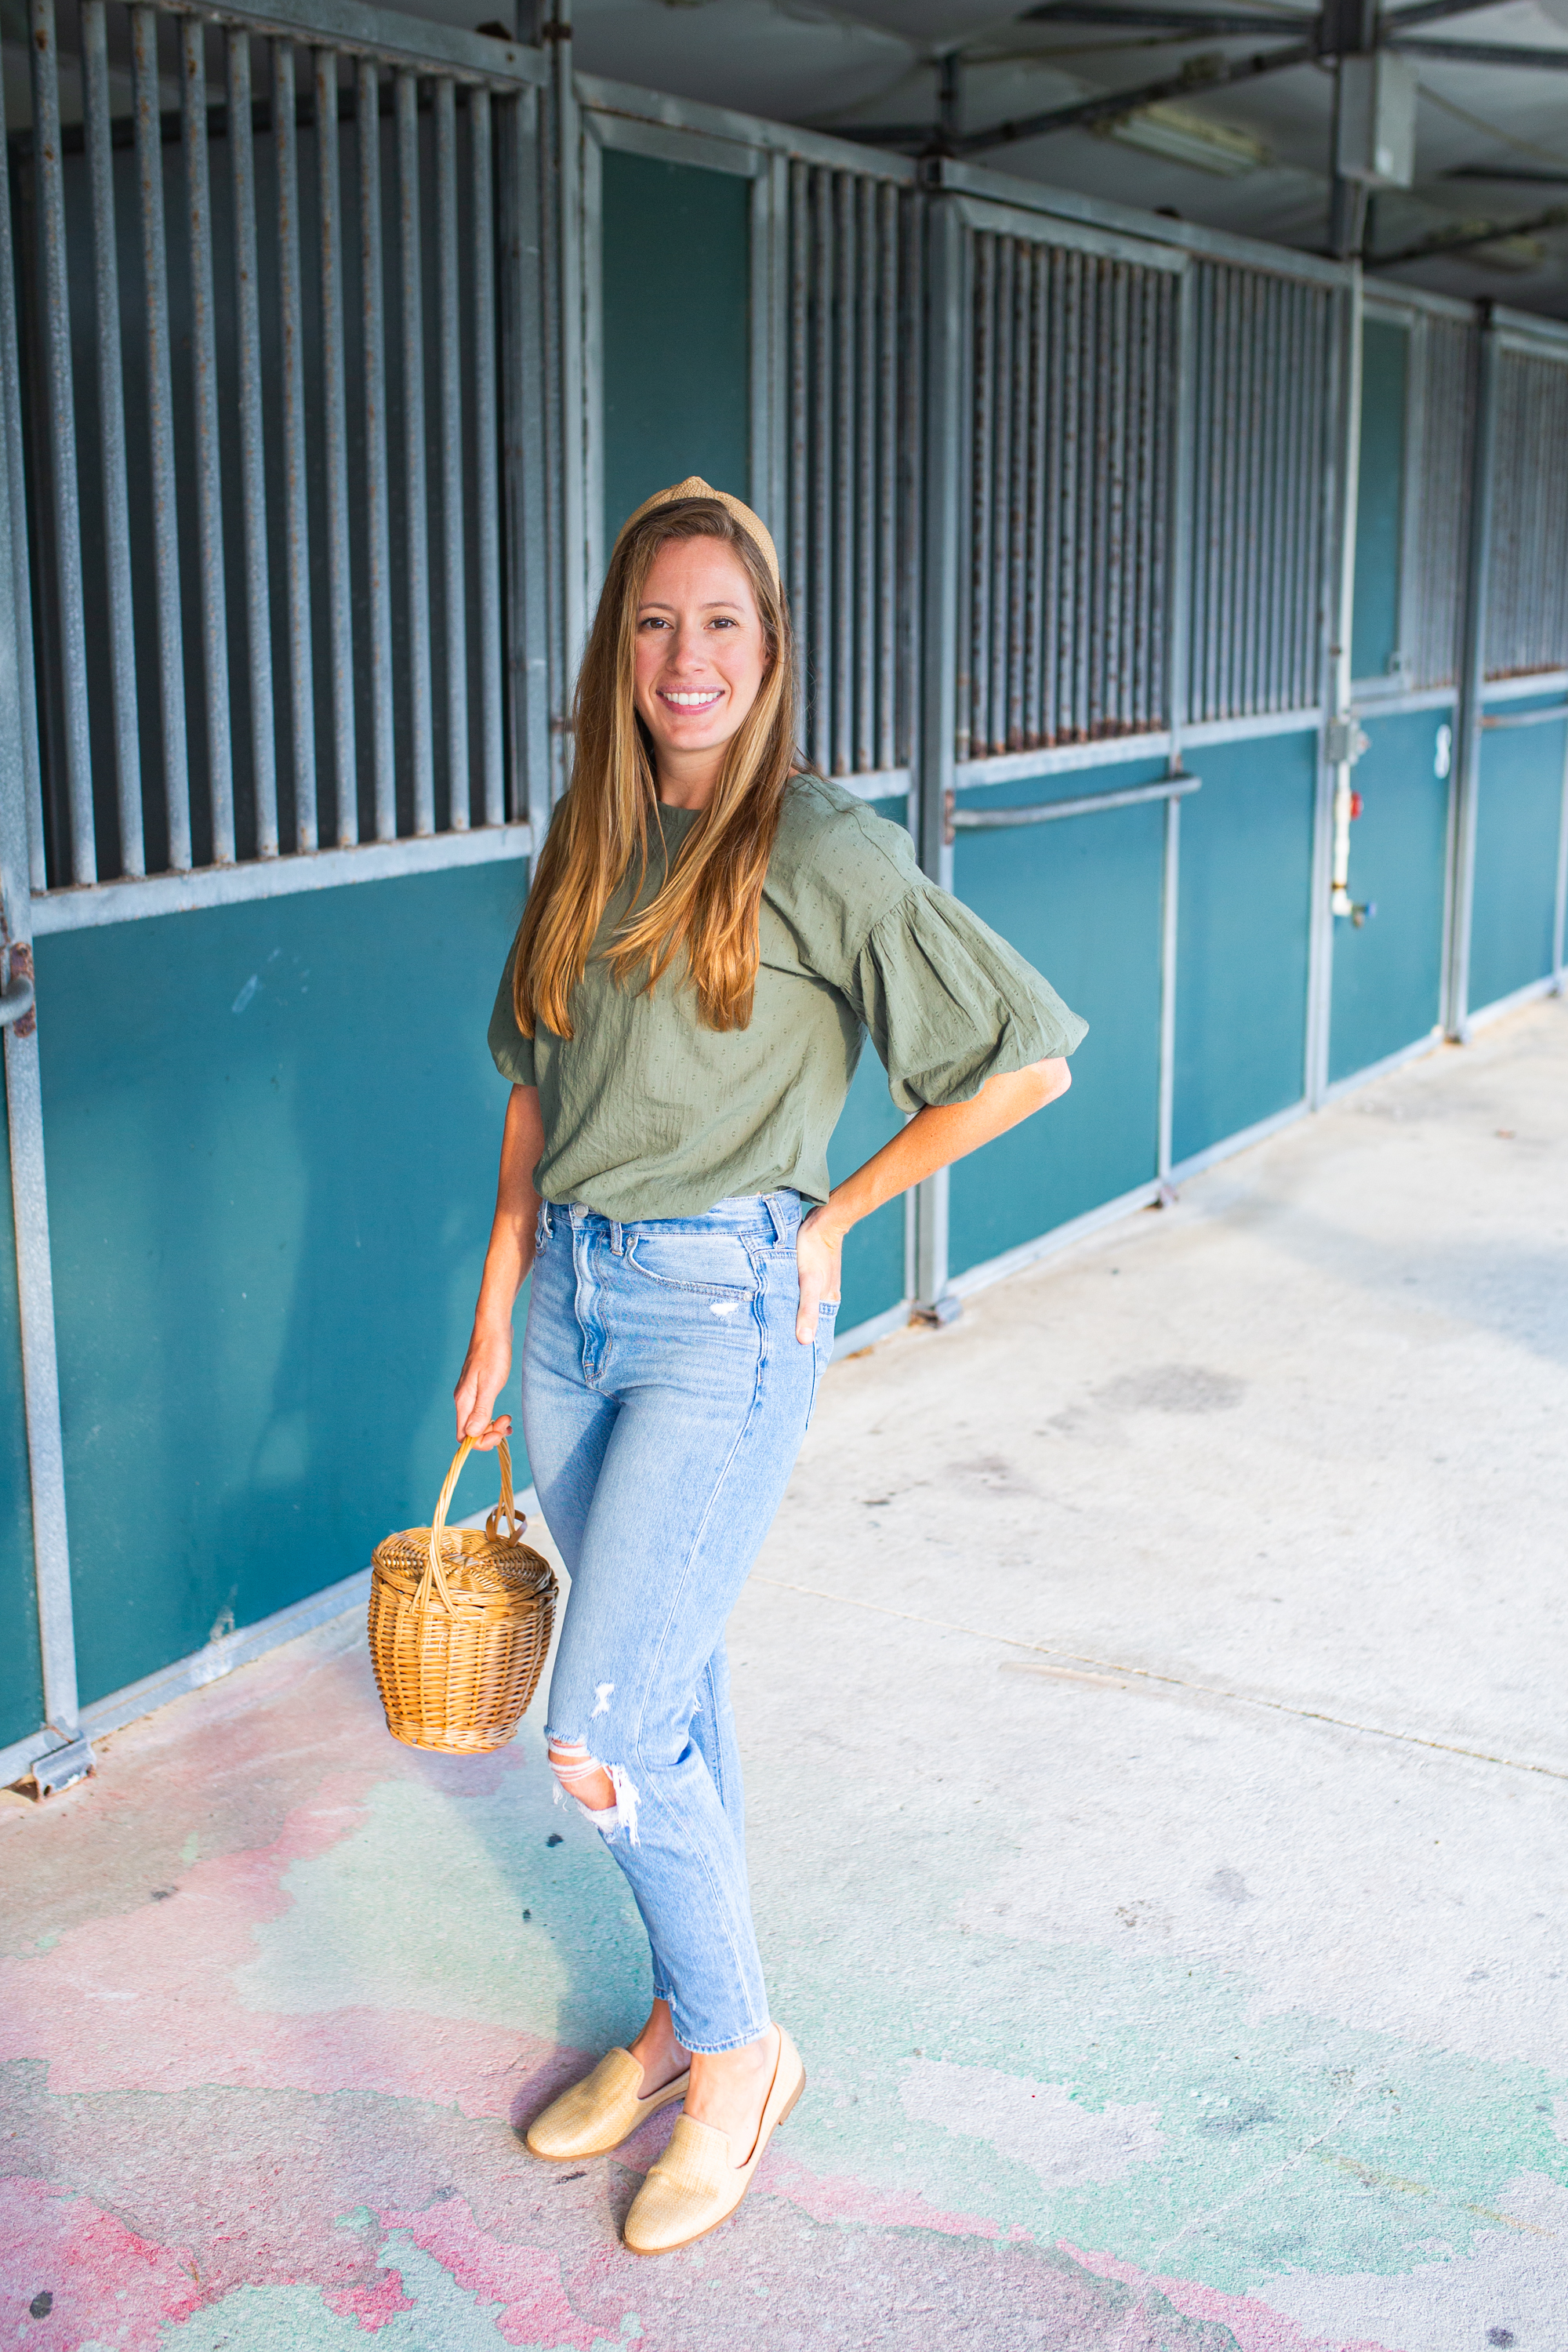 How to Style Mom Jeans for Fall / Cute Fall Outfits / Autumn Outfits / Casual Fall Outfits / Mom Jeans Outfit Fall / Outfit Ideas with Mom Jeans / Puff Sleeve Top - Sunshine Style, A Florida Fashion and Lifestyle Blog by Katie